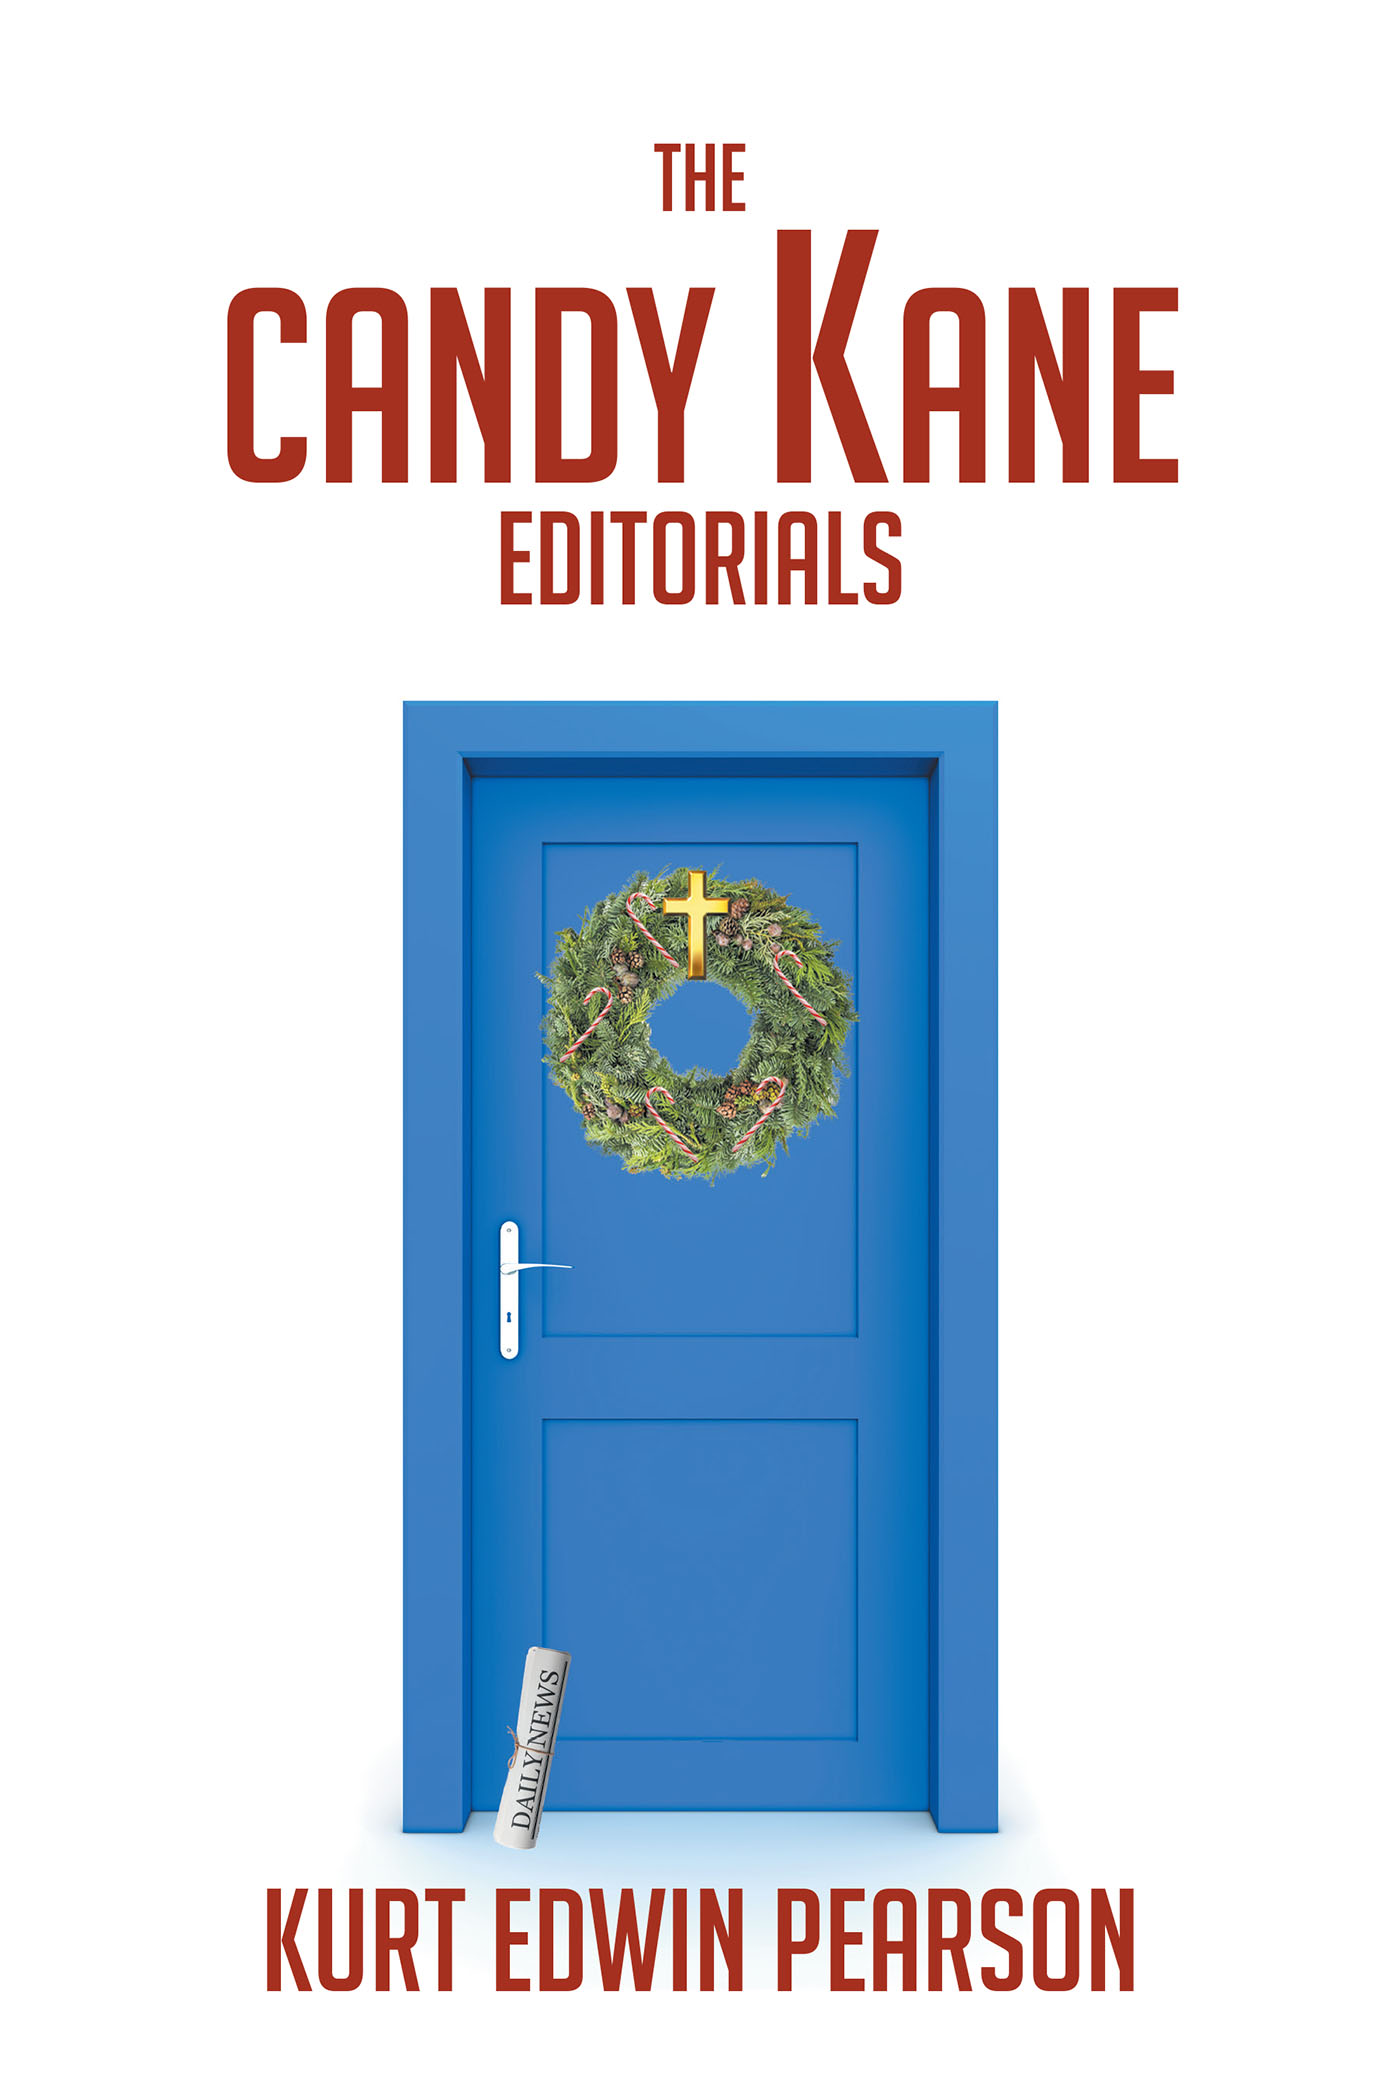 Kurt Edwin Pearson’s Newly Released "The Candy Kane Editorials" is a Warmhearted Story of Second Chances, Healing and Unexpected Blessings